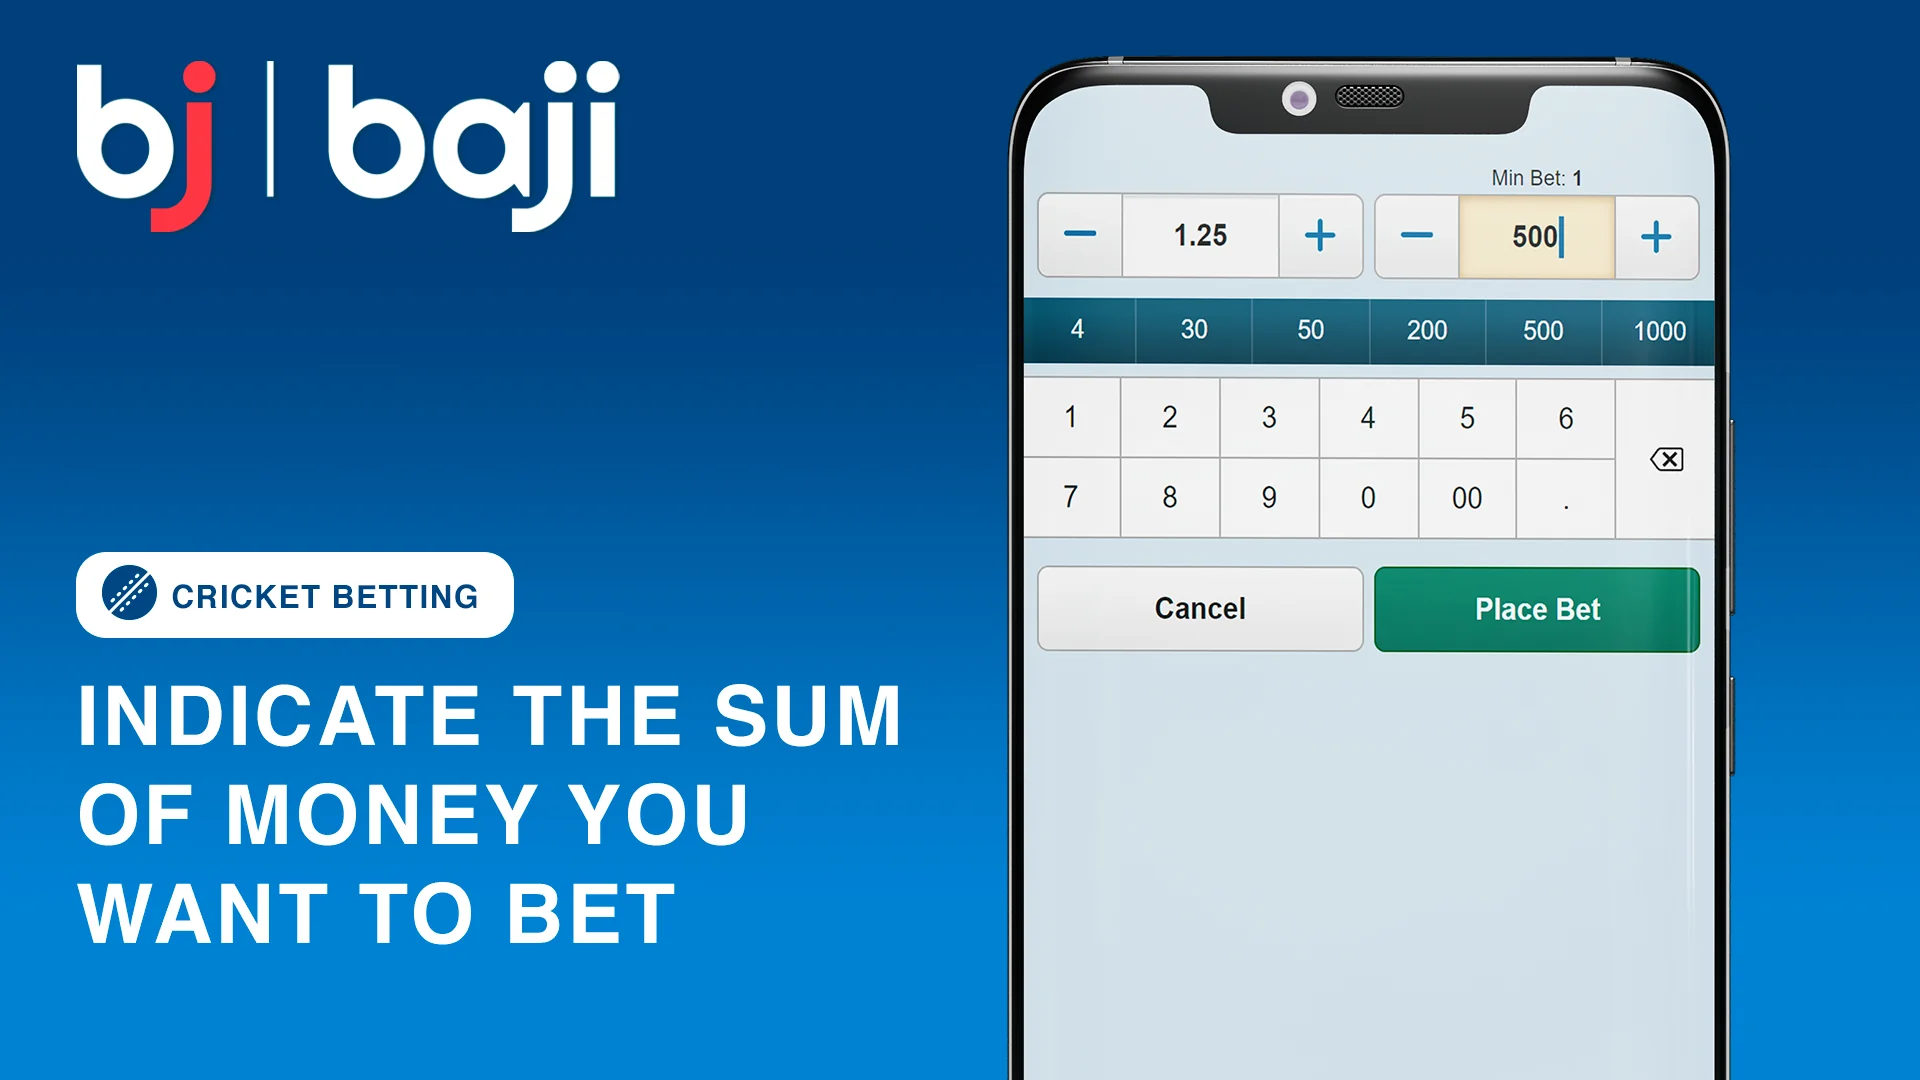 Indicate the Sum You Want to Bet on Cricket - Baji